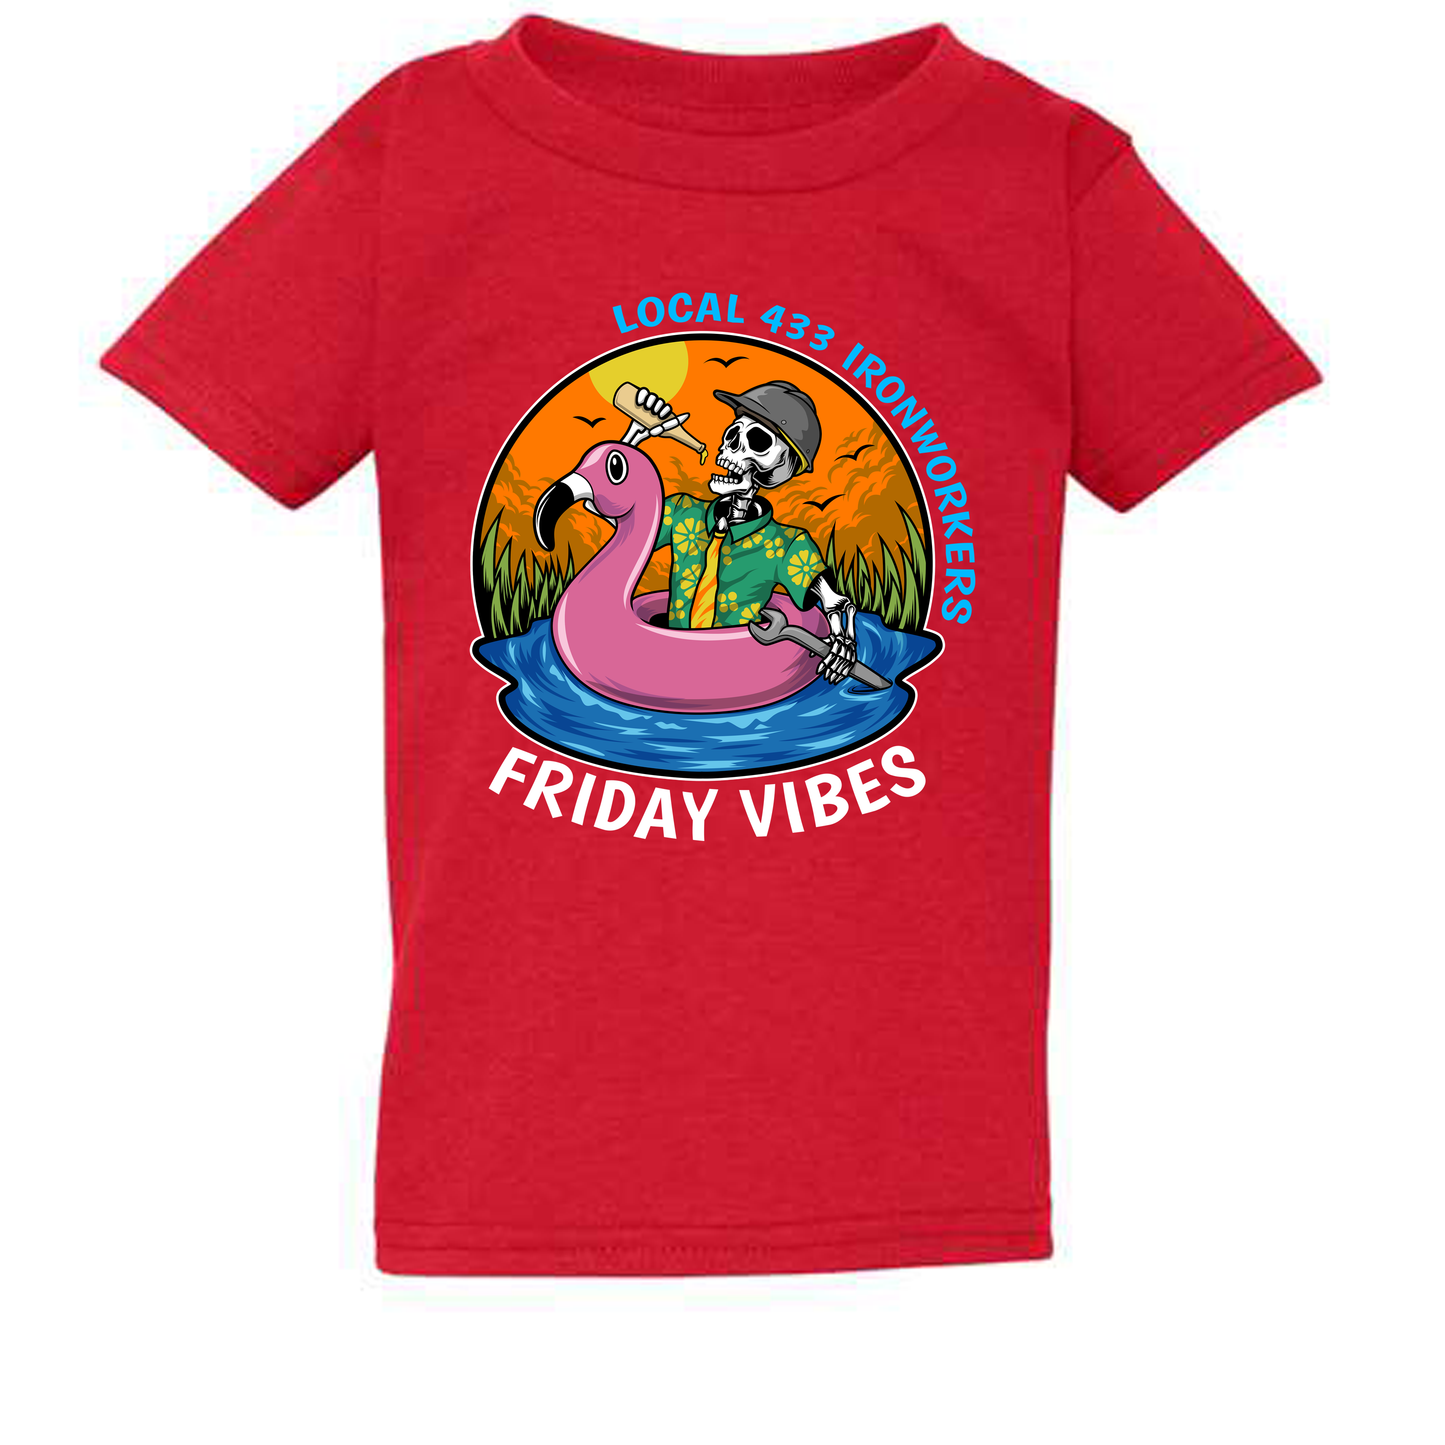 FRIDAY VIBES TODDLER T-SHIRT 433